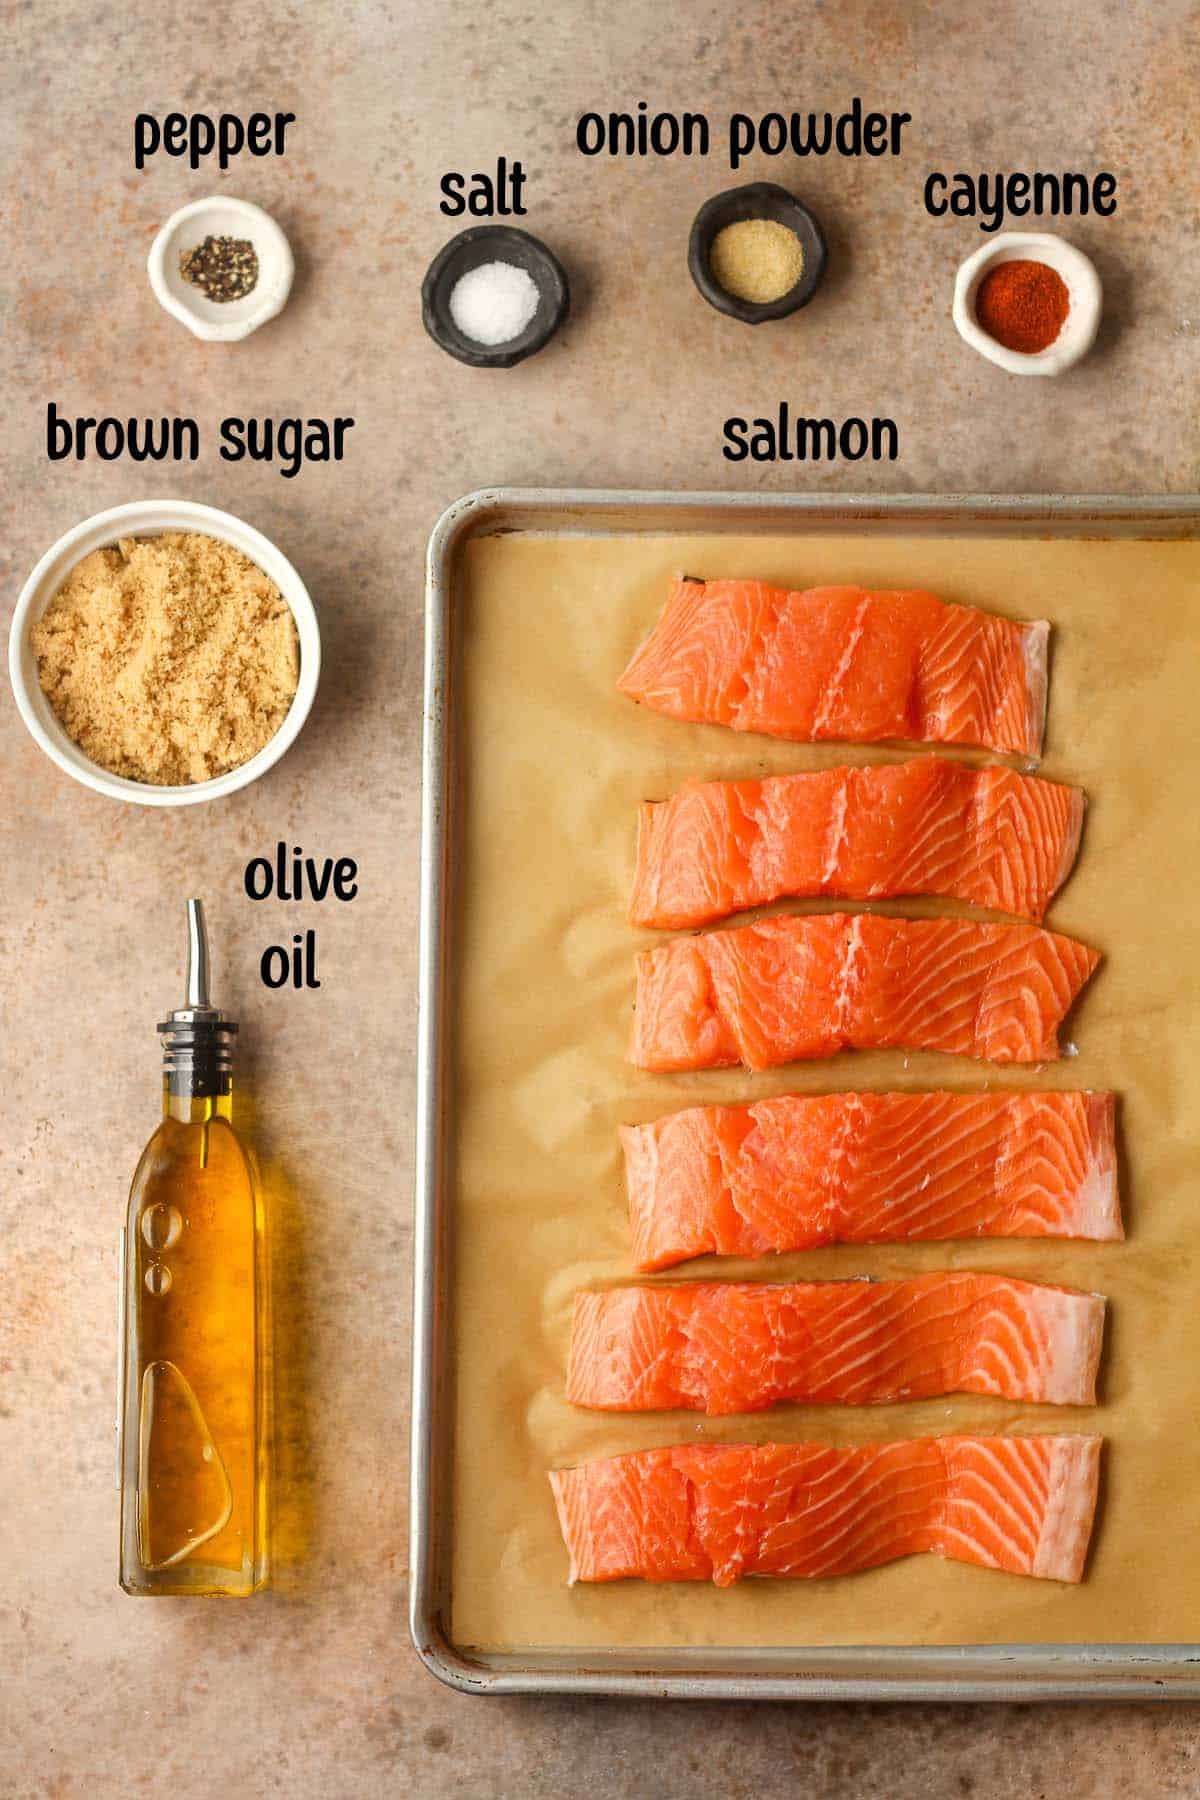 The ingredients for the smoked salmon.